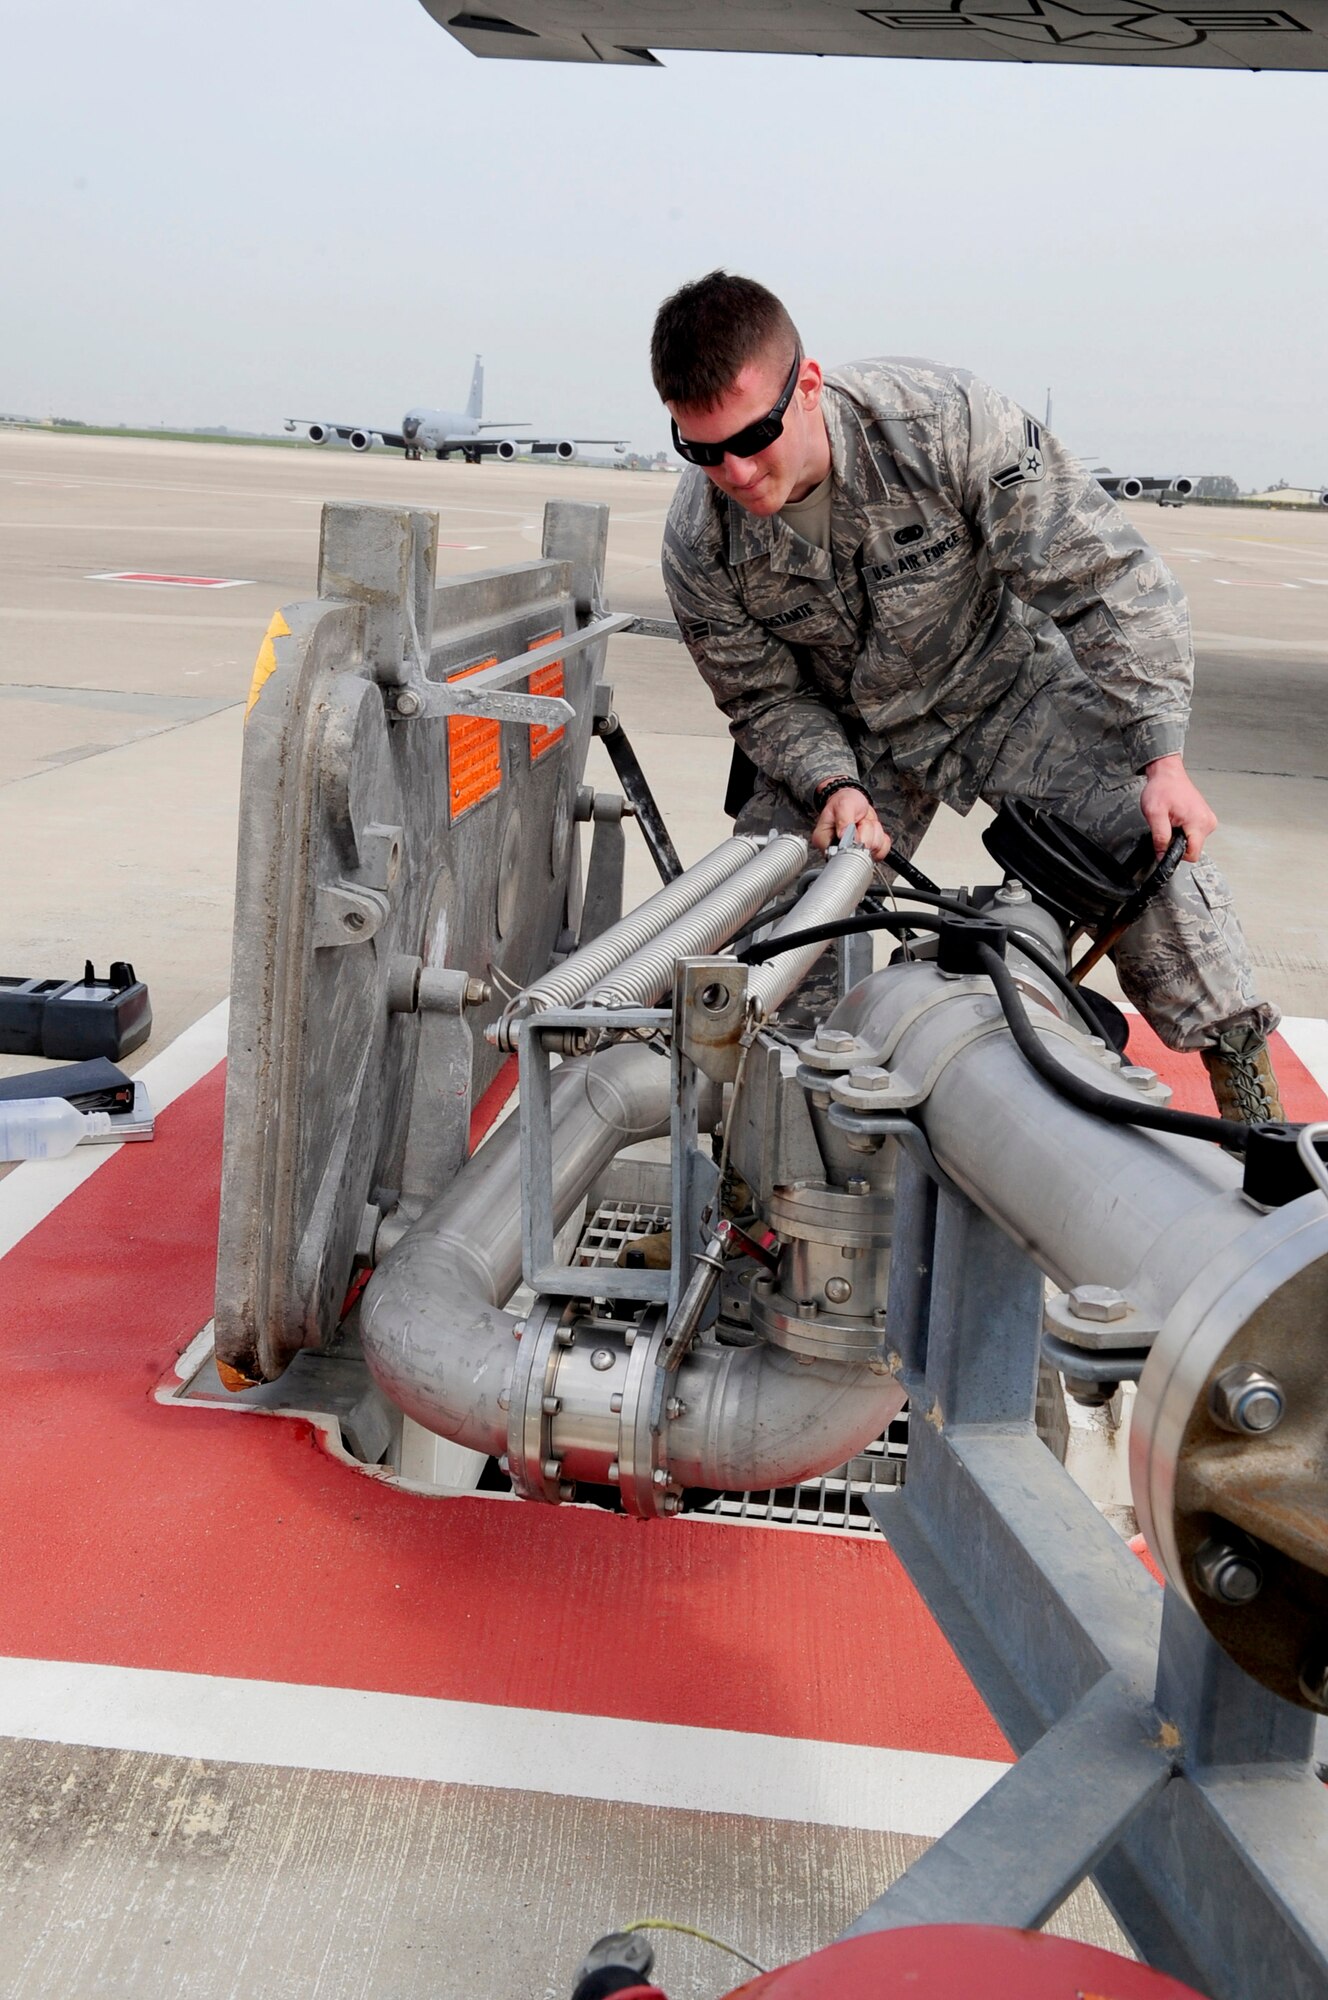 313TH AIR EXPEDITIONARY WING -- An Airman from the 100th Logistics Readiness Squadron attaches a pantograph to an underground fuel source to refuel a KC-135 Stratotanker during the current ongoing mission in support of Joint Task Force Odyssey Dawn March 25. Joint Task Force Odyssey Dawn is the U.S. Africa Command task force established to provide operational and tactical command and control of U.S. military forces supporting the international response to the unrest in Libya and enforcement of United Nations Security Council Resolution (UNSCR) 1973. UNSCR 1973 authorizes all necessary measures to protect civilians in Libya under threat of attack by Gadhafi regime forces. JTF Odyssey Dawn is commanded by U.S. Navy Admiral Samuel J. Locklear, III. (U.S. Air Force photo/Senior Airman Ethan Morgan)